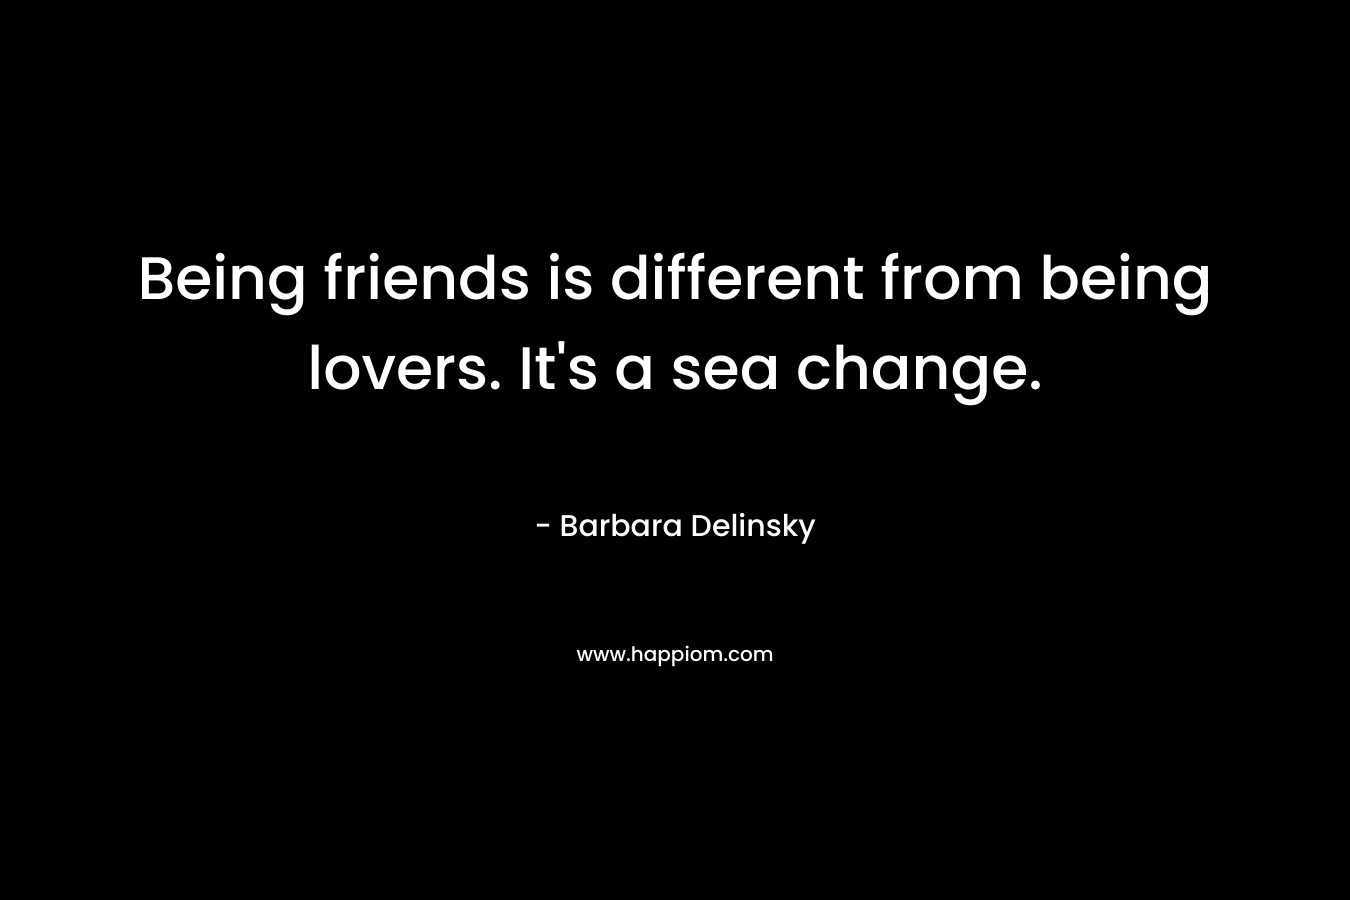 Being friends is different from being lovers. It's a sea change.